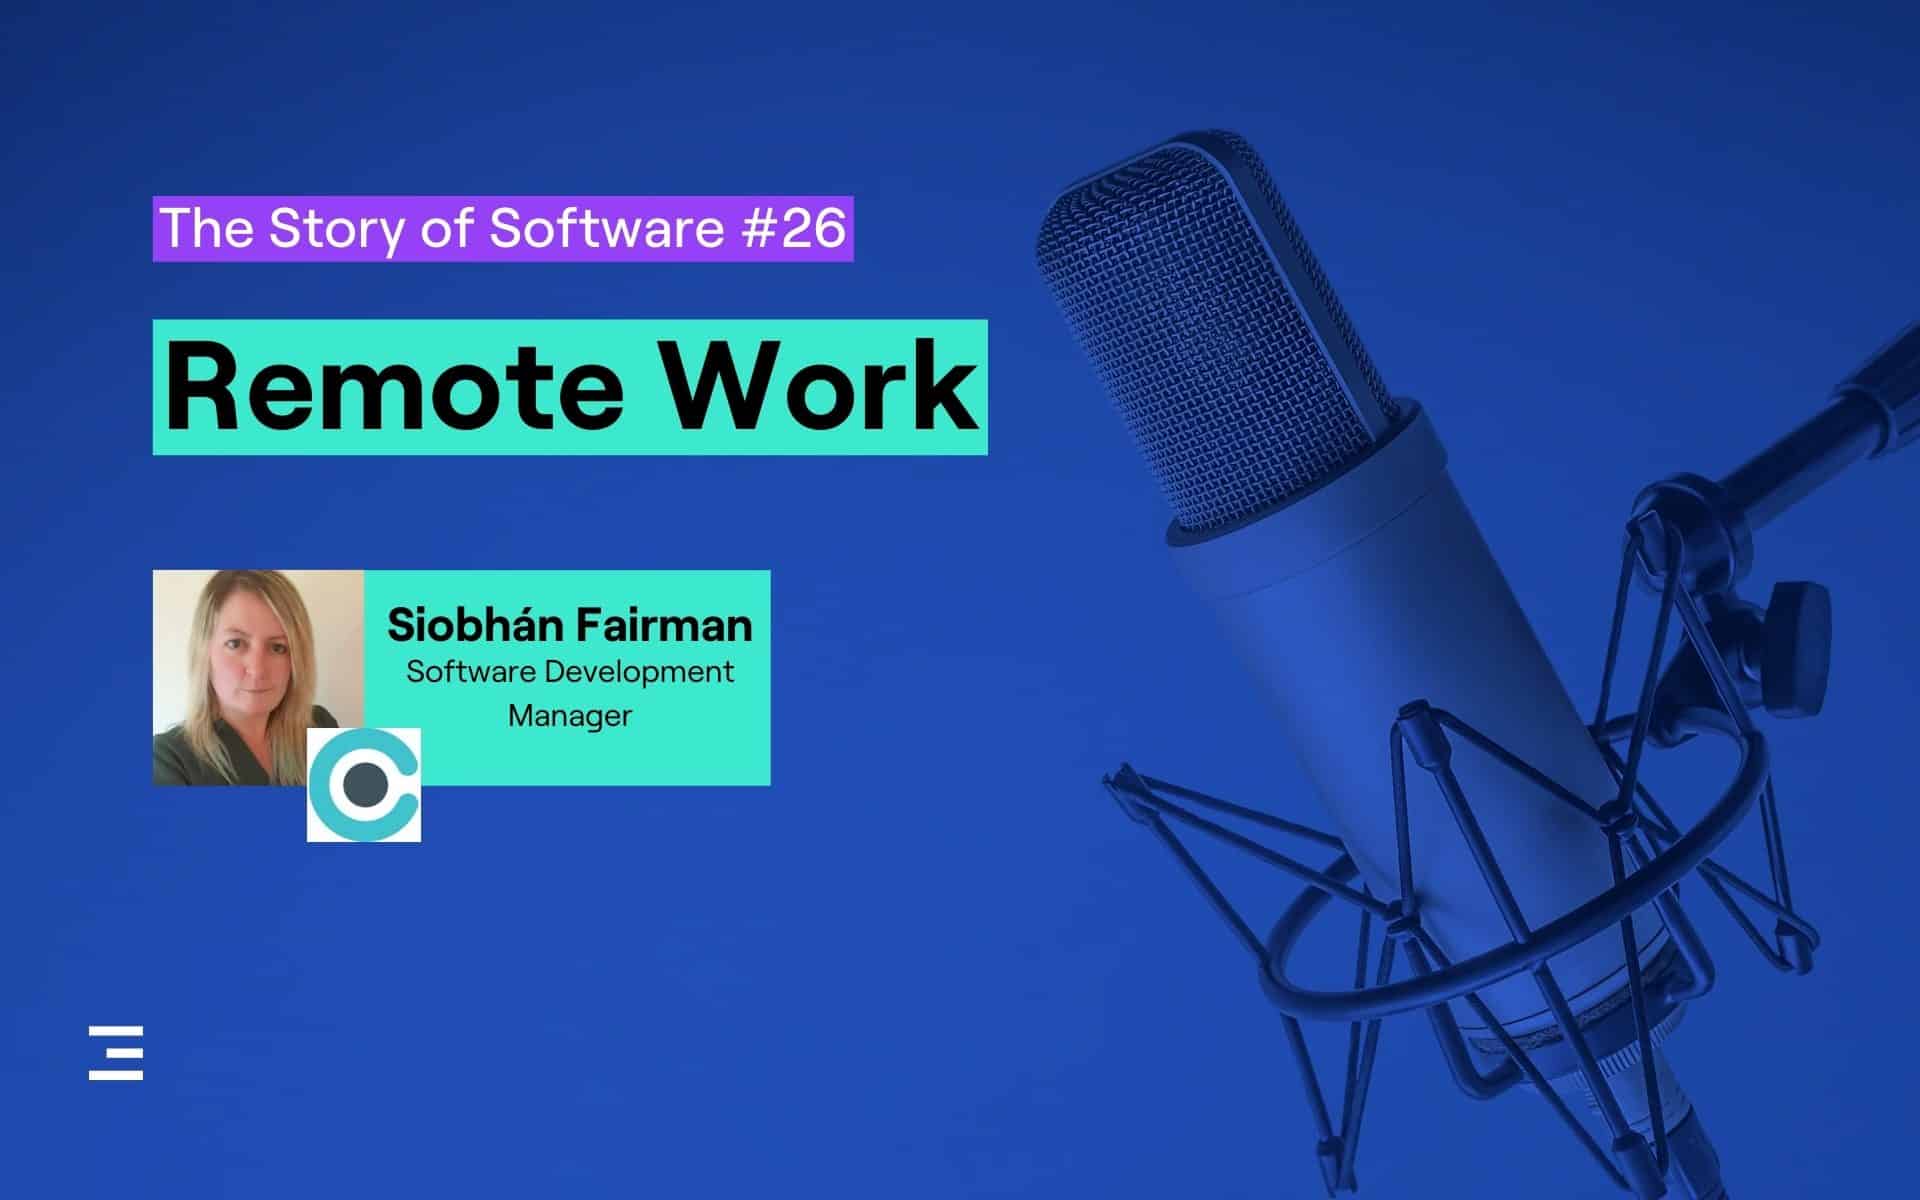 remote work podcast episode in the story of software